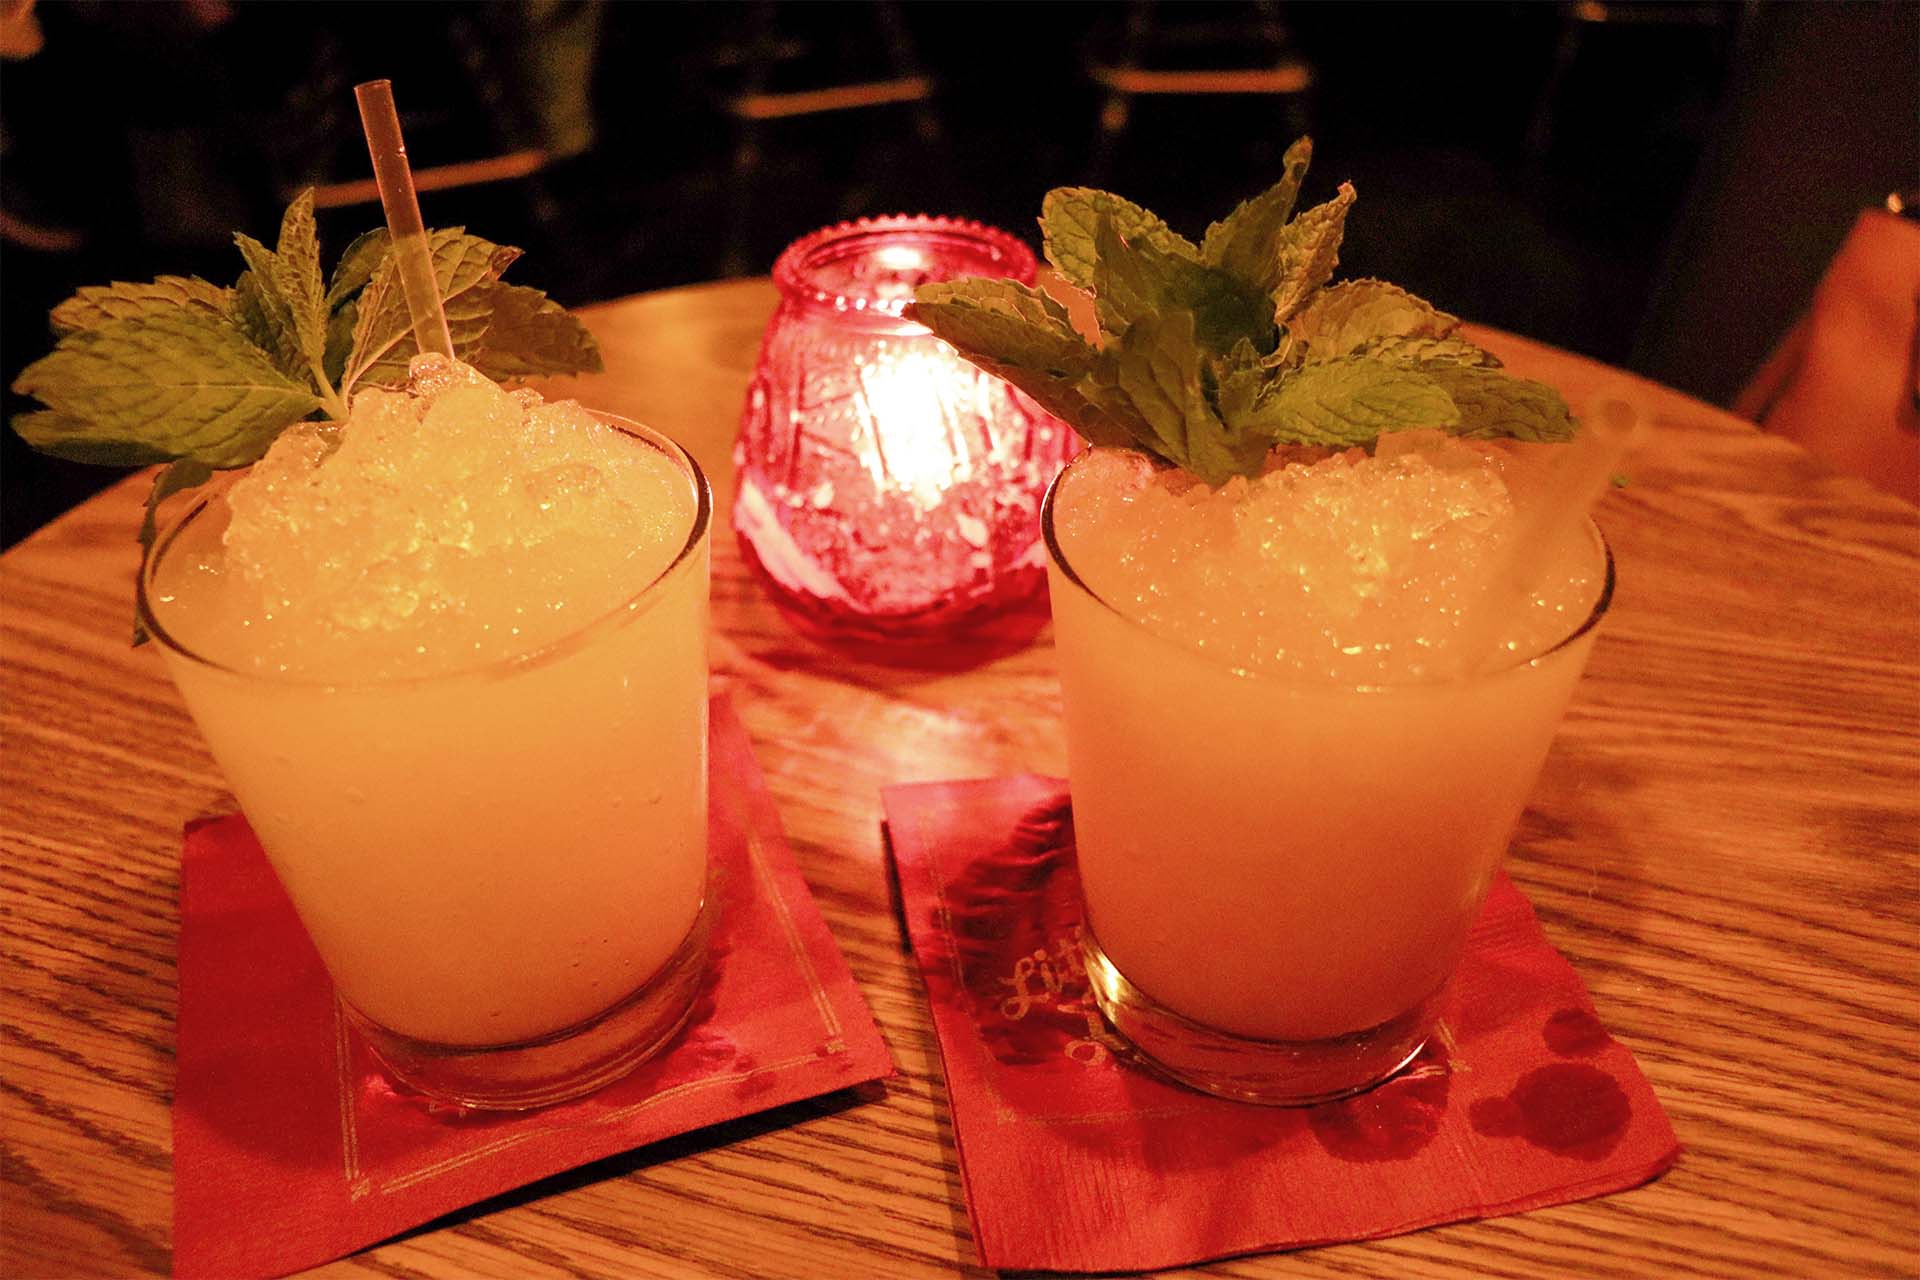 Two mint-garnished tropical cocktails, lit from behind by candle light.